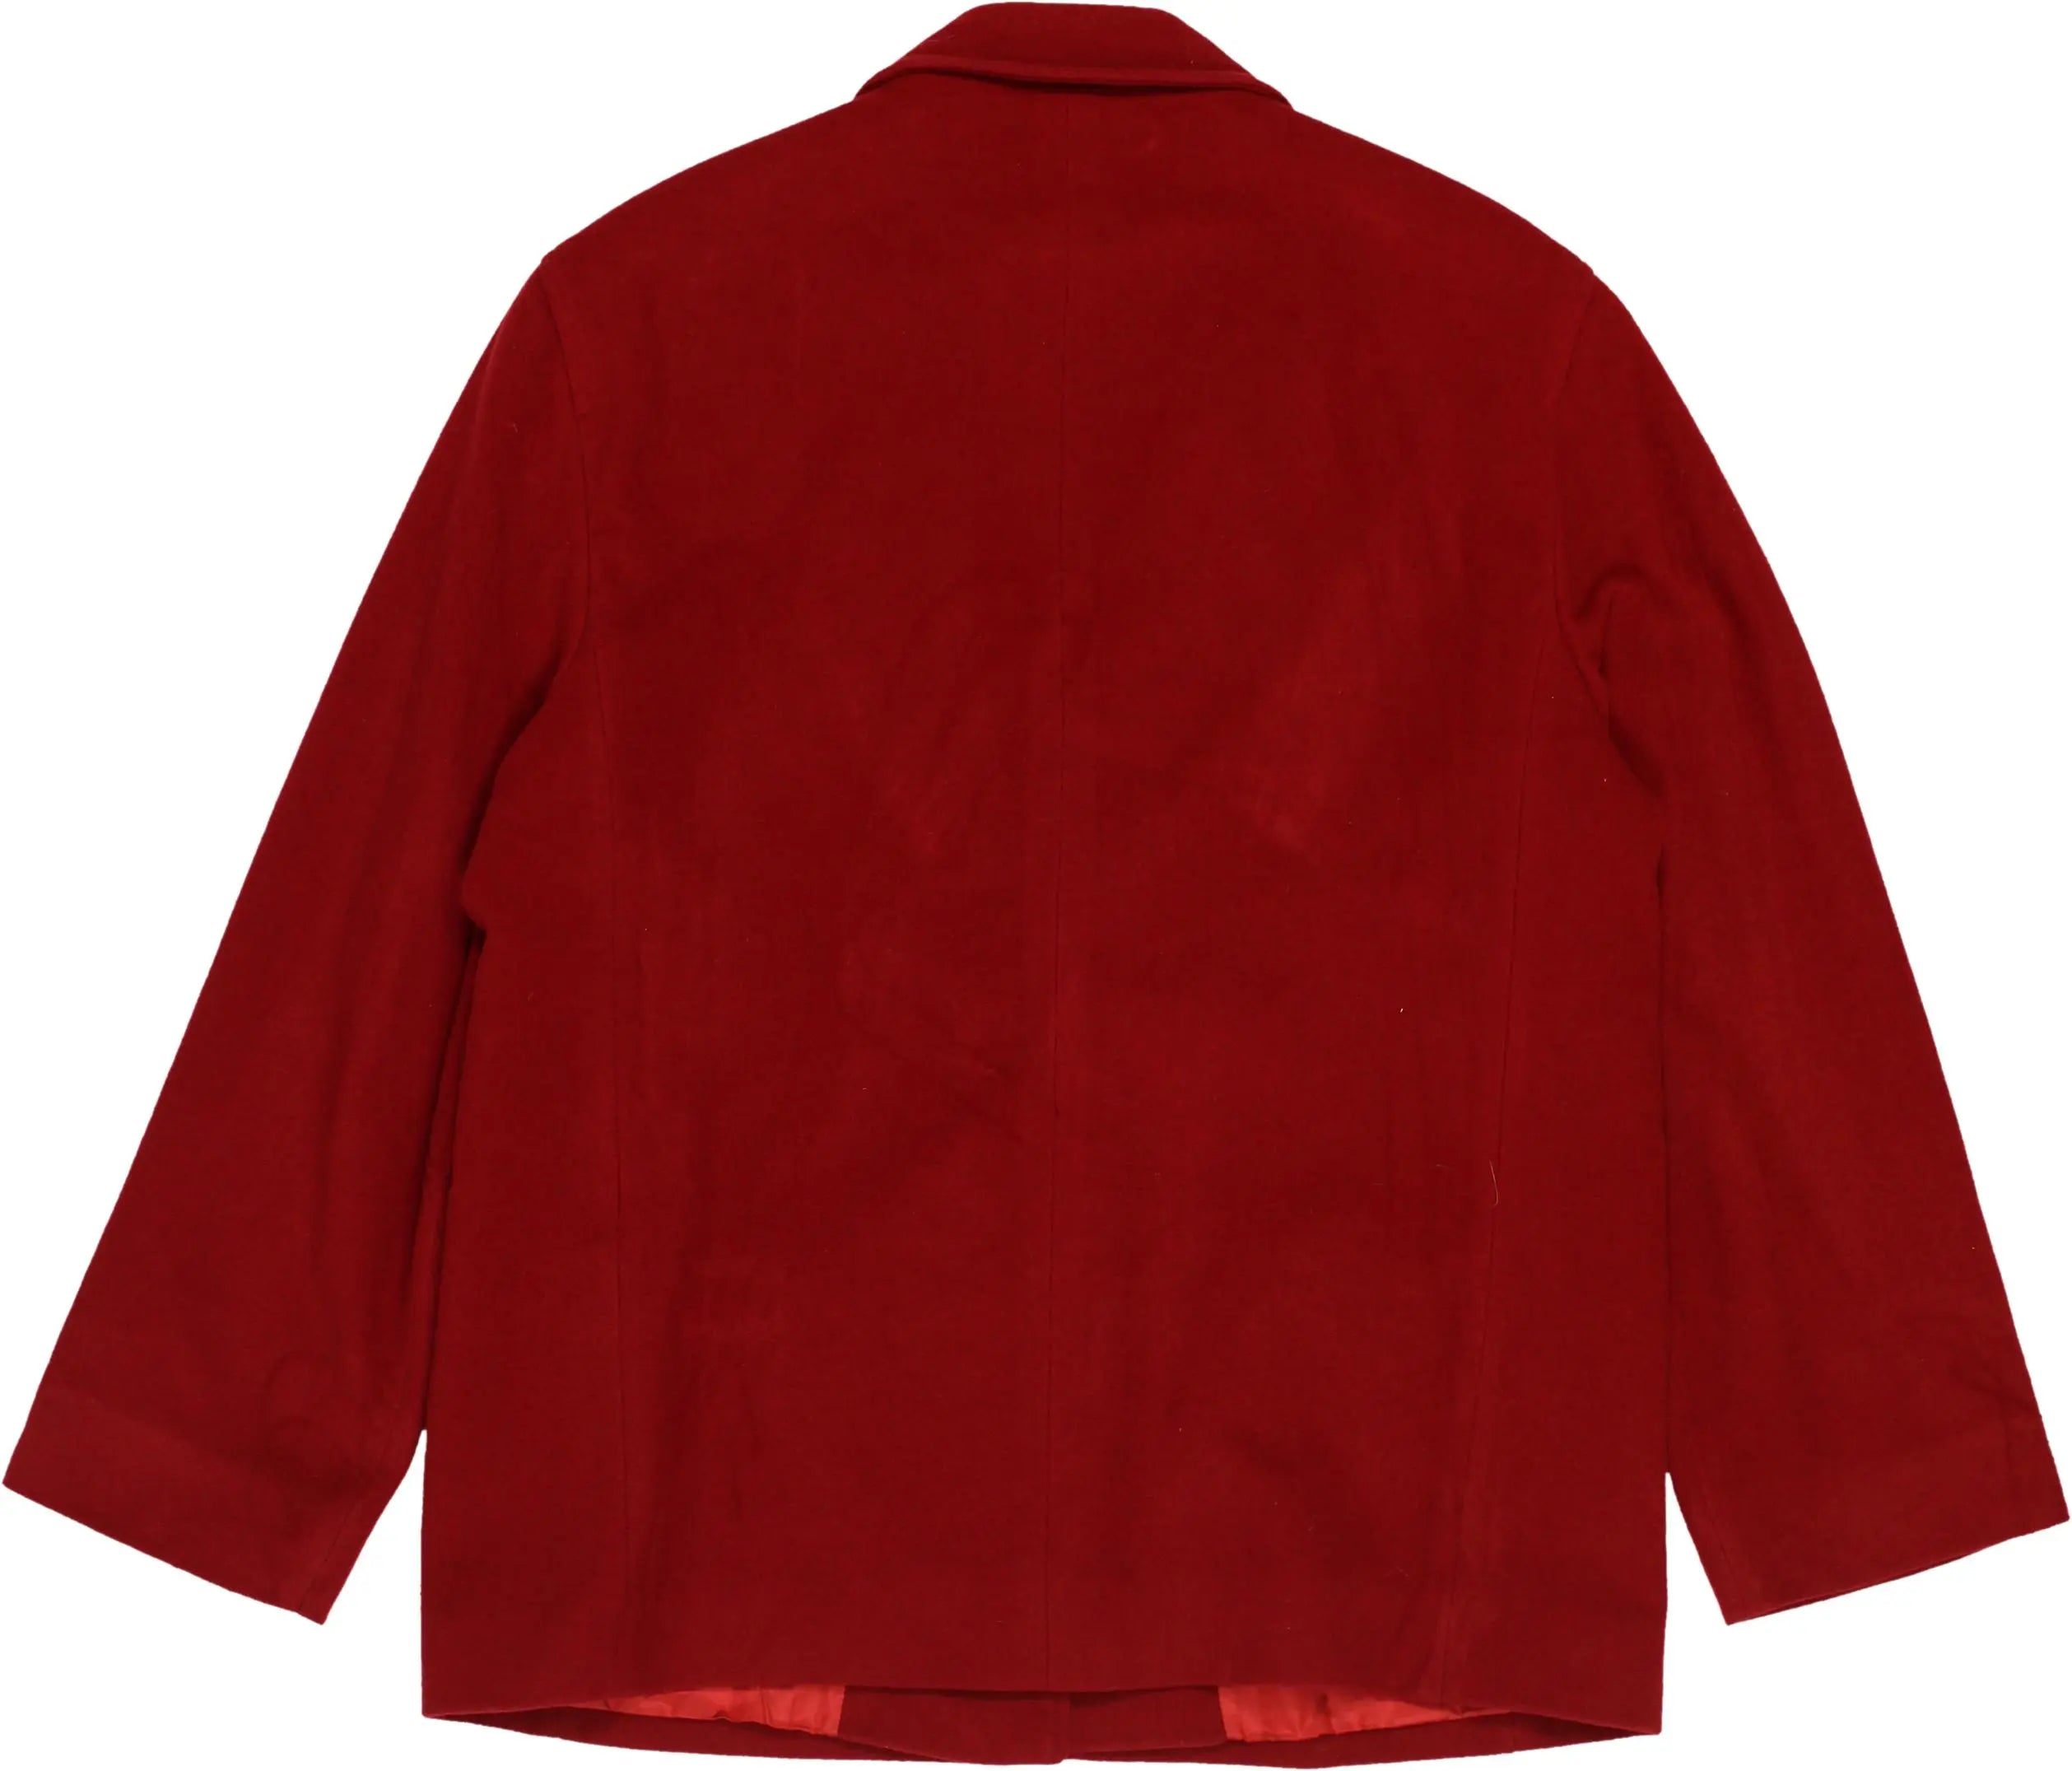 Unknown - Red blazer- ThriftTale.com - Vintage and second handclothing